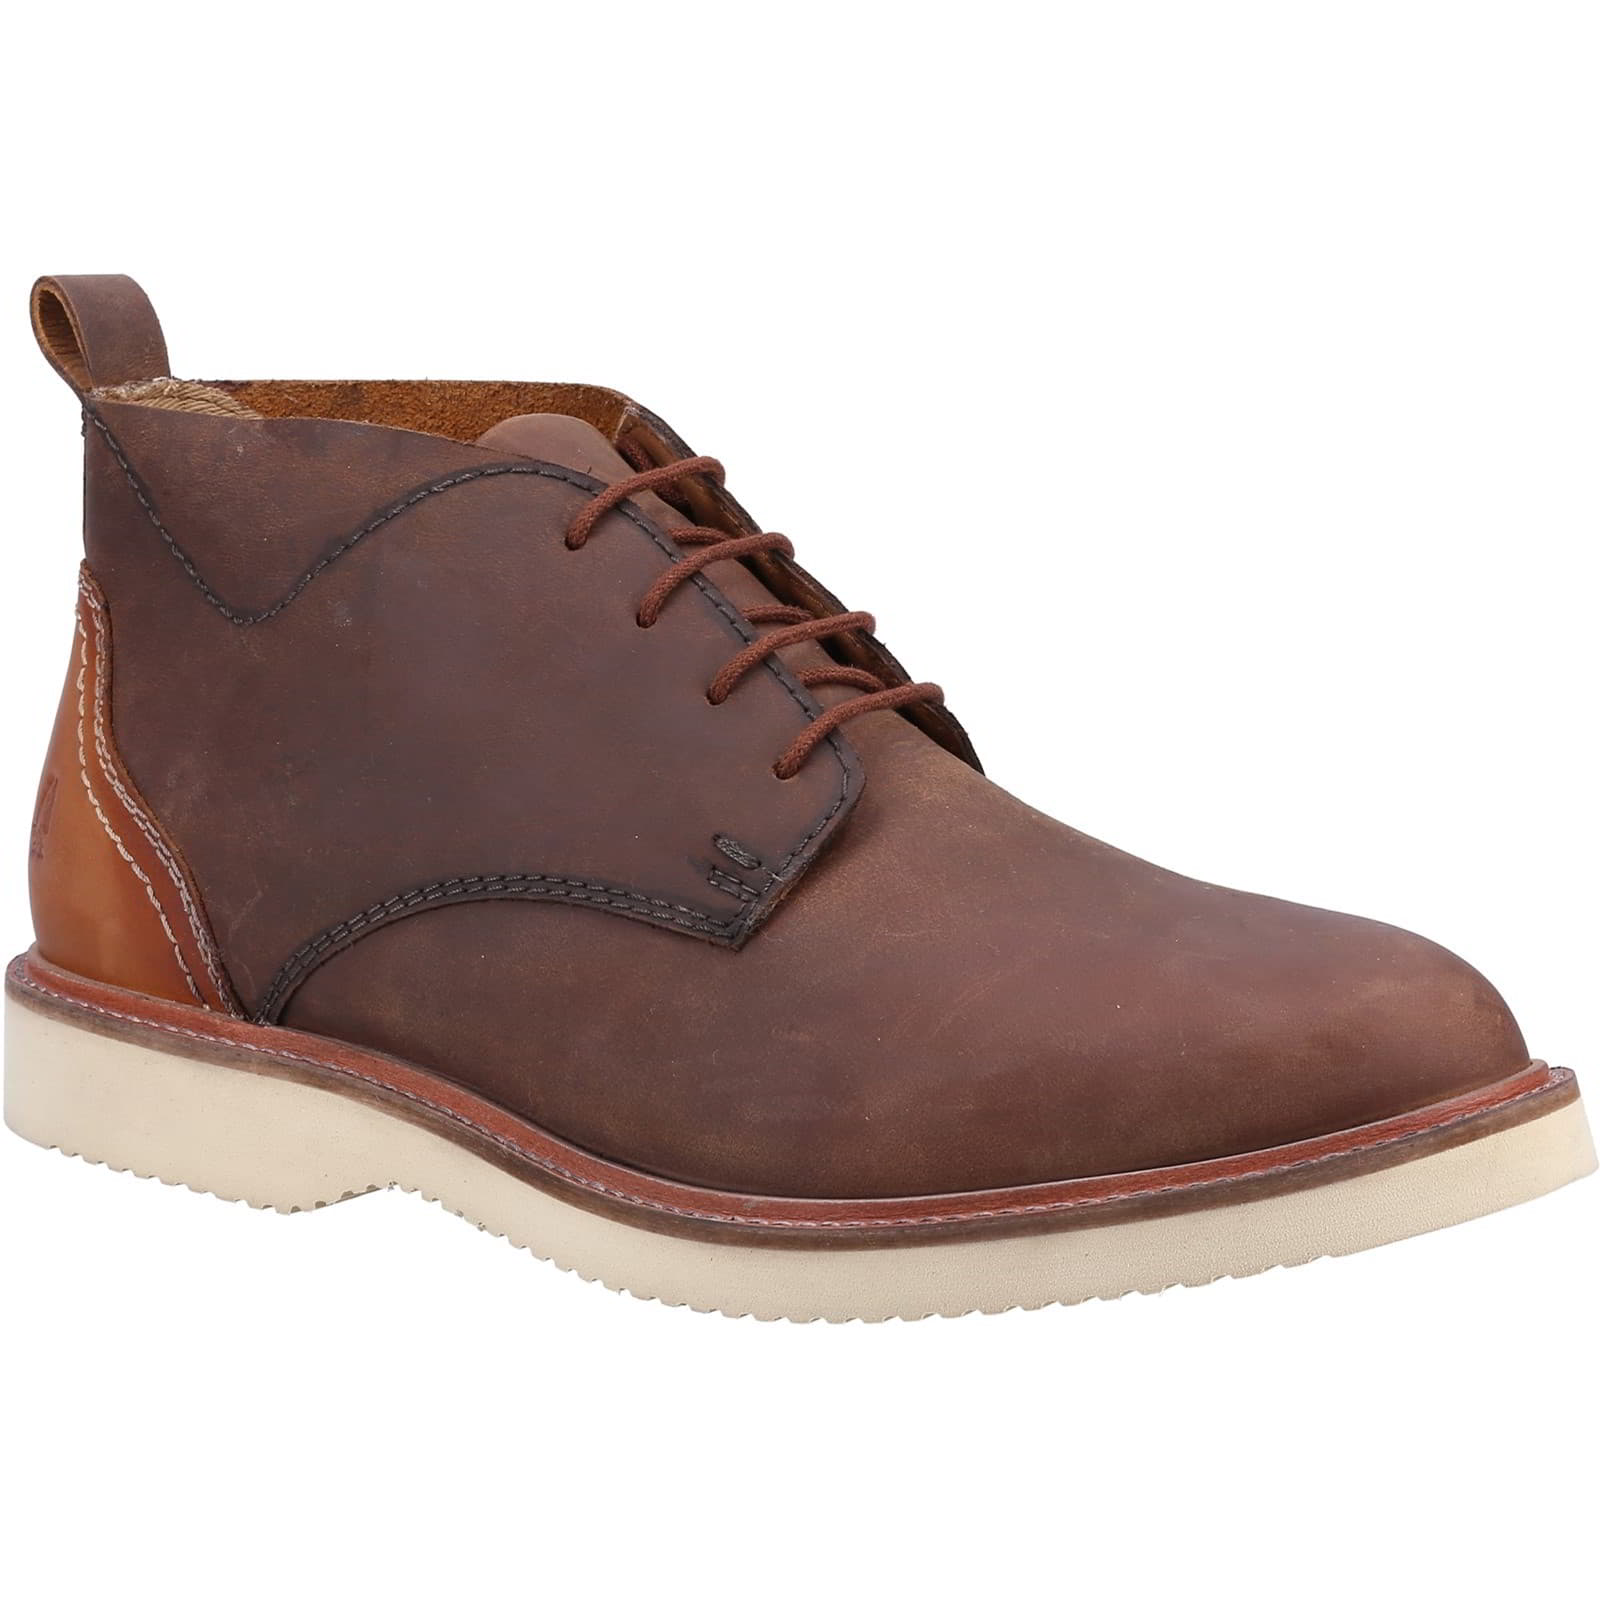 Hush Puppies Men's Wesley Lace UP Desert Chukka Ankle Boots - UK 9